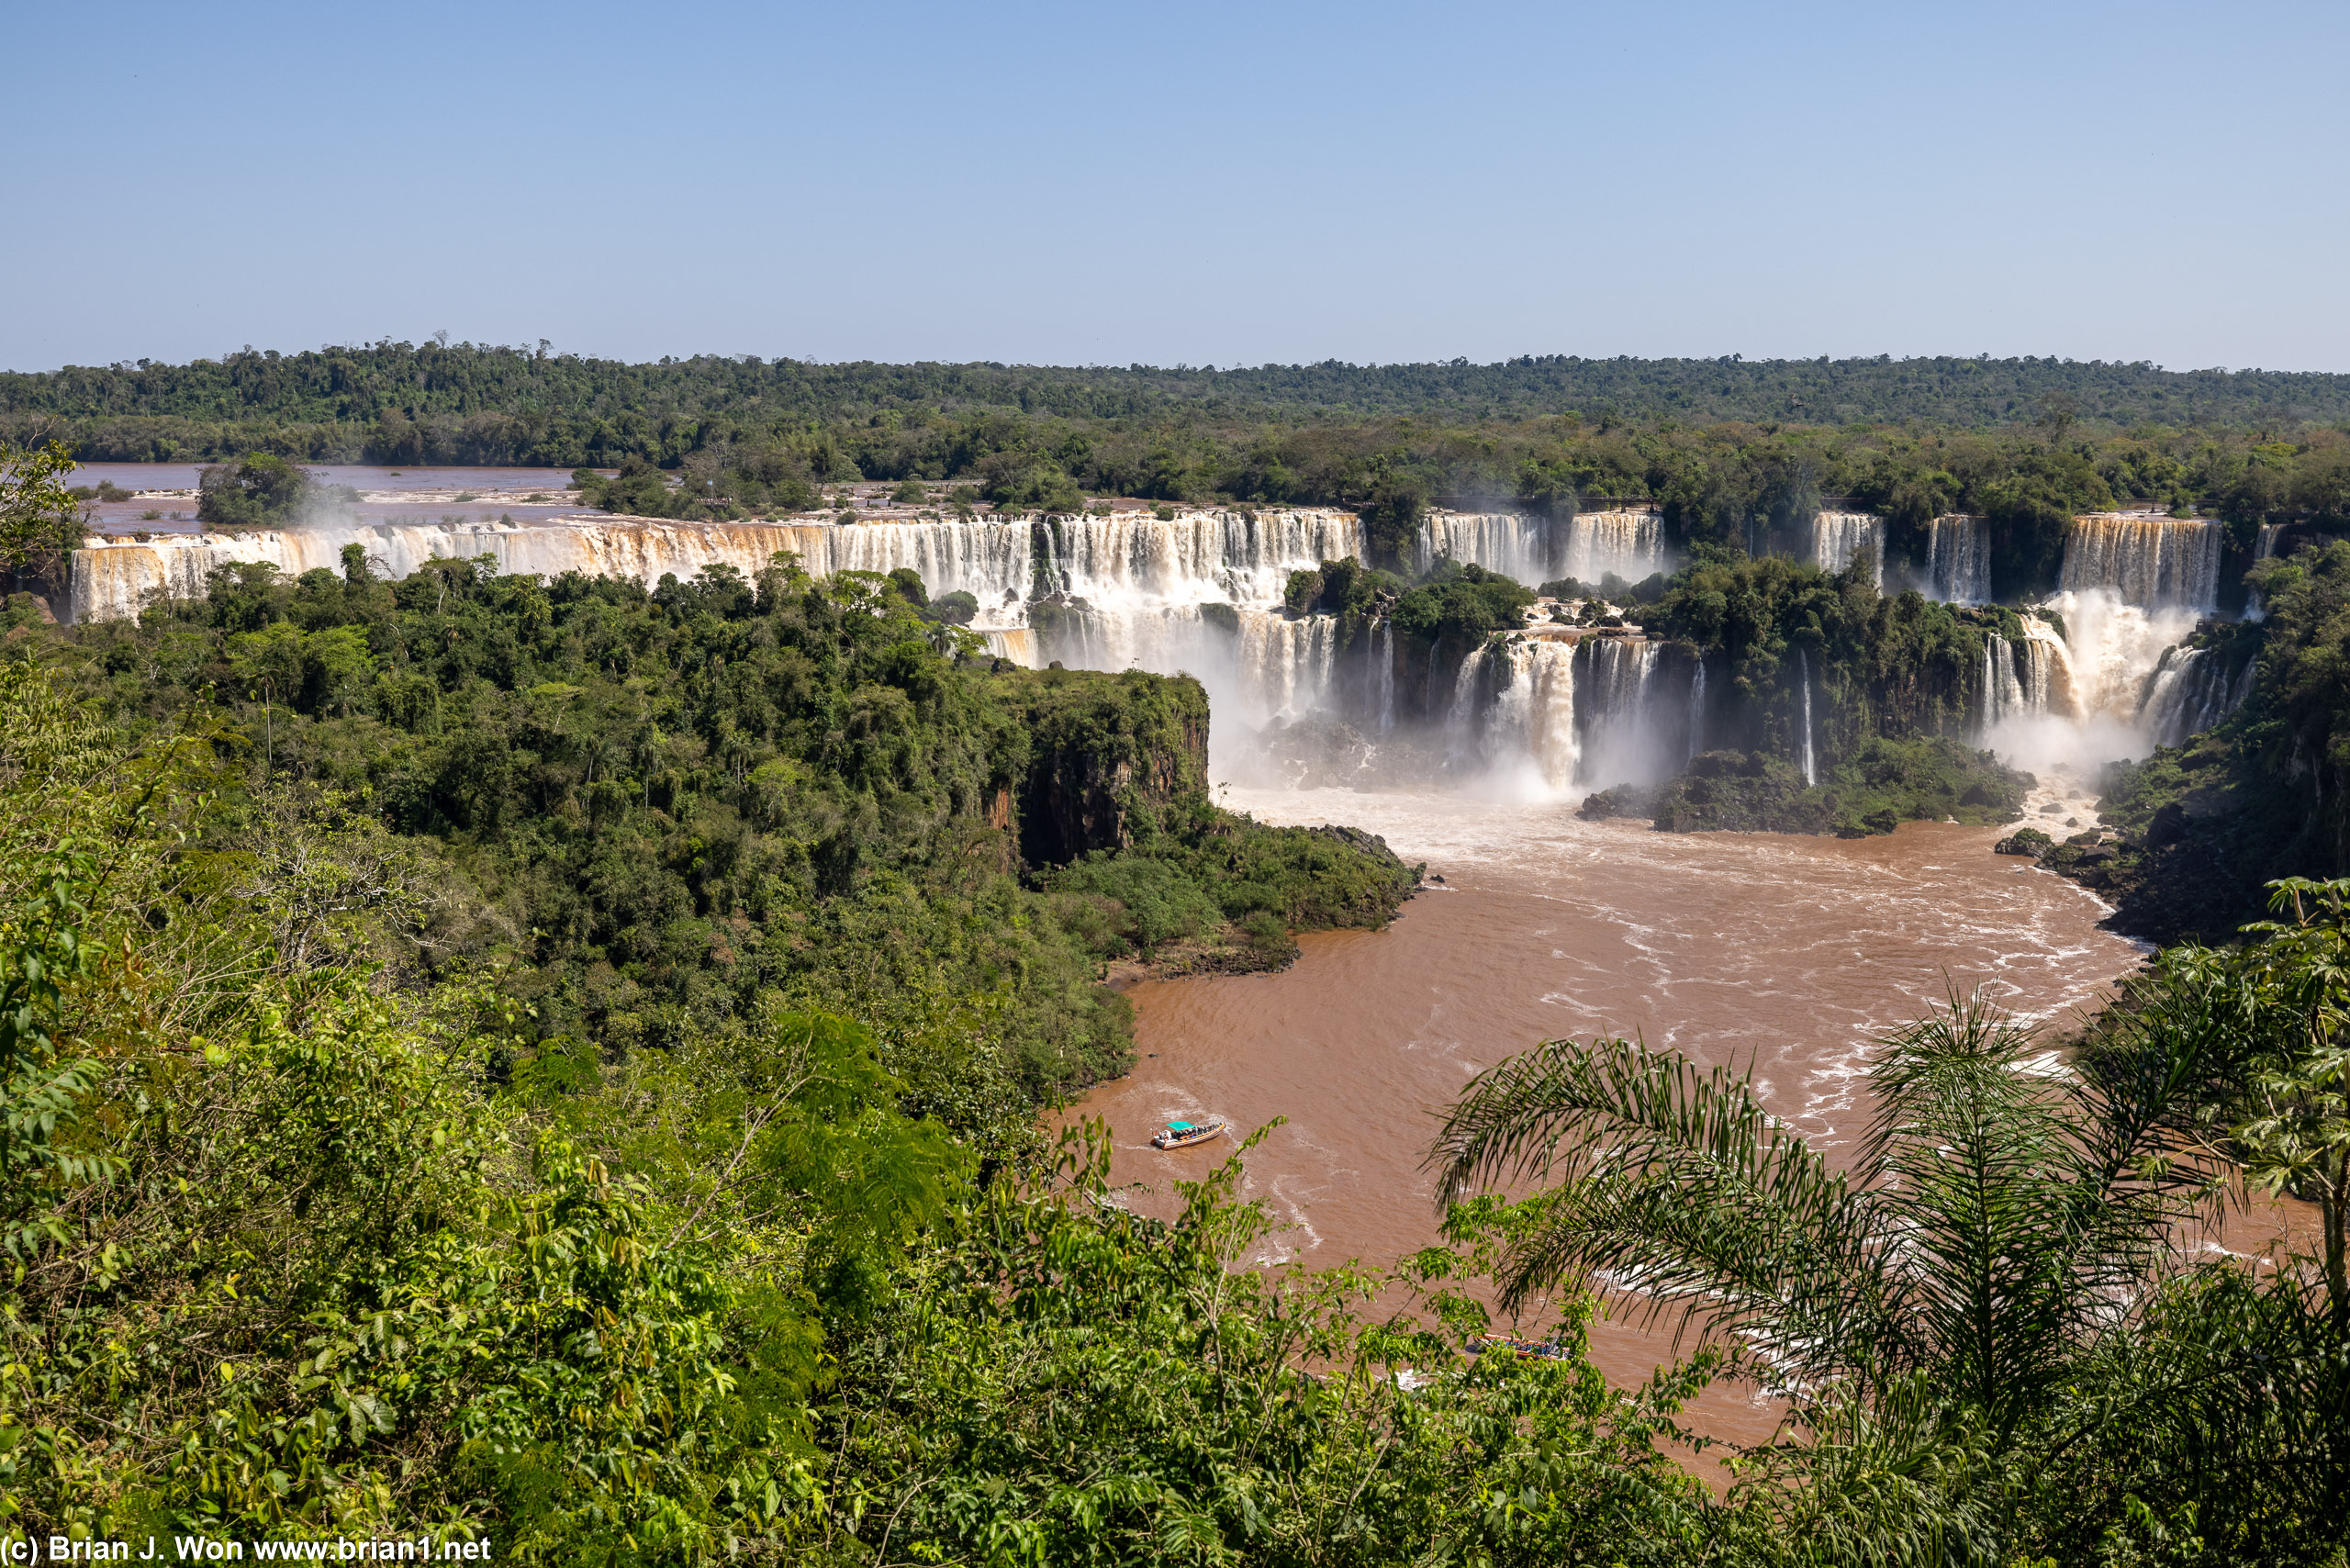 Sunny day at Iguazu Falls, looking at the San Martin segment right across from the hotel.